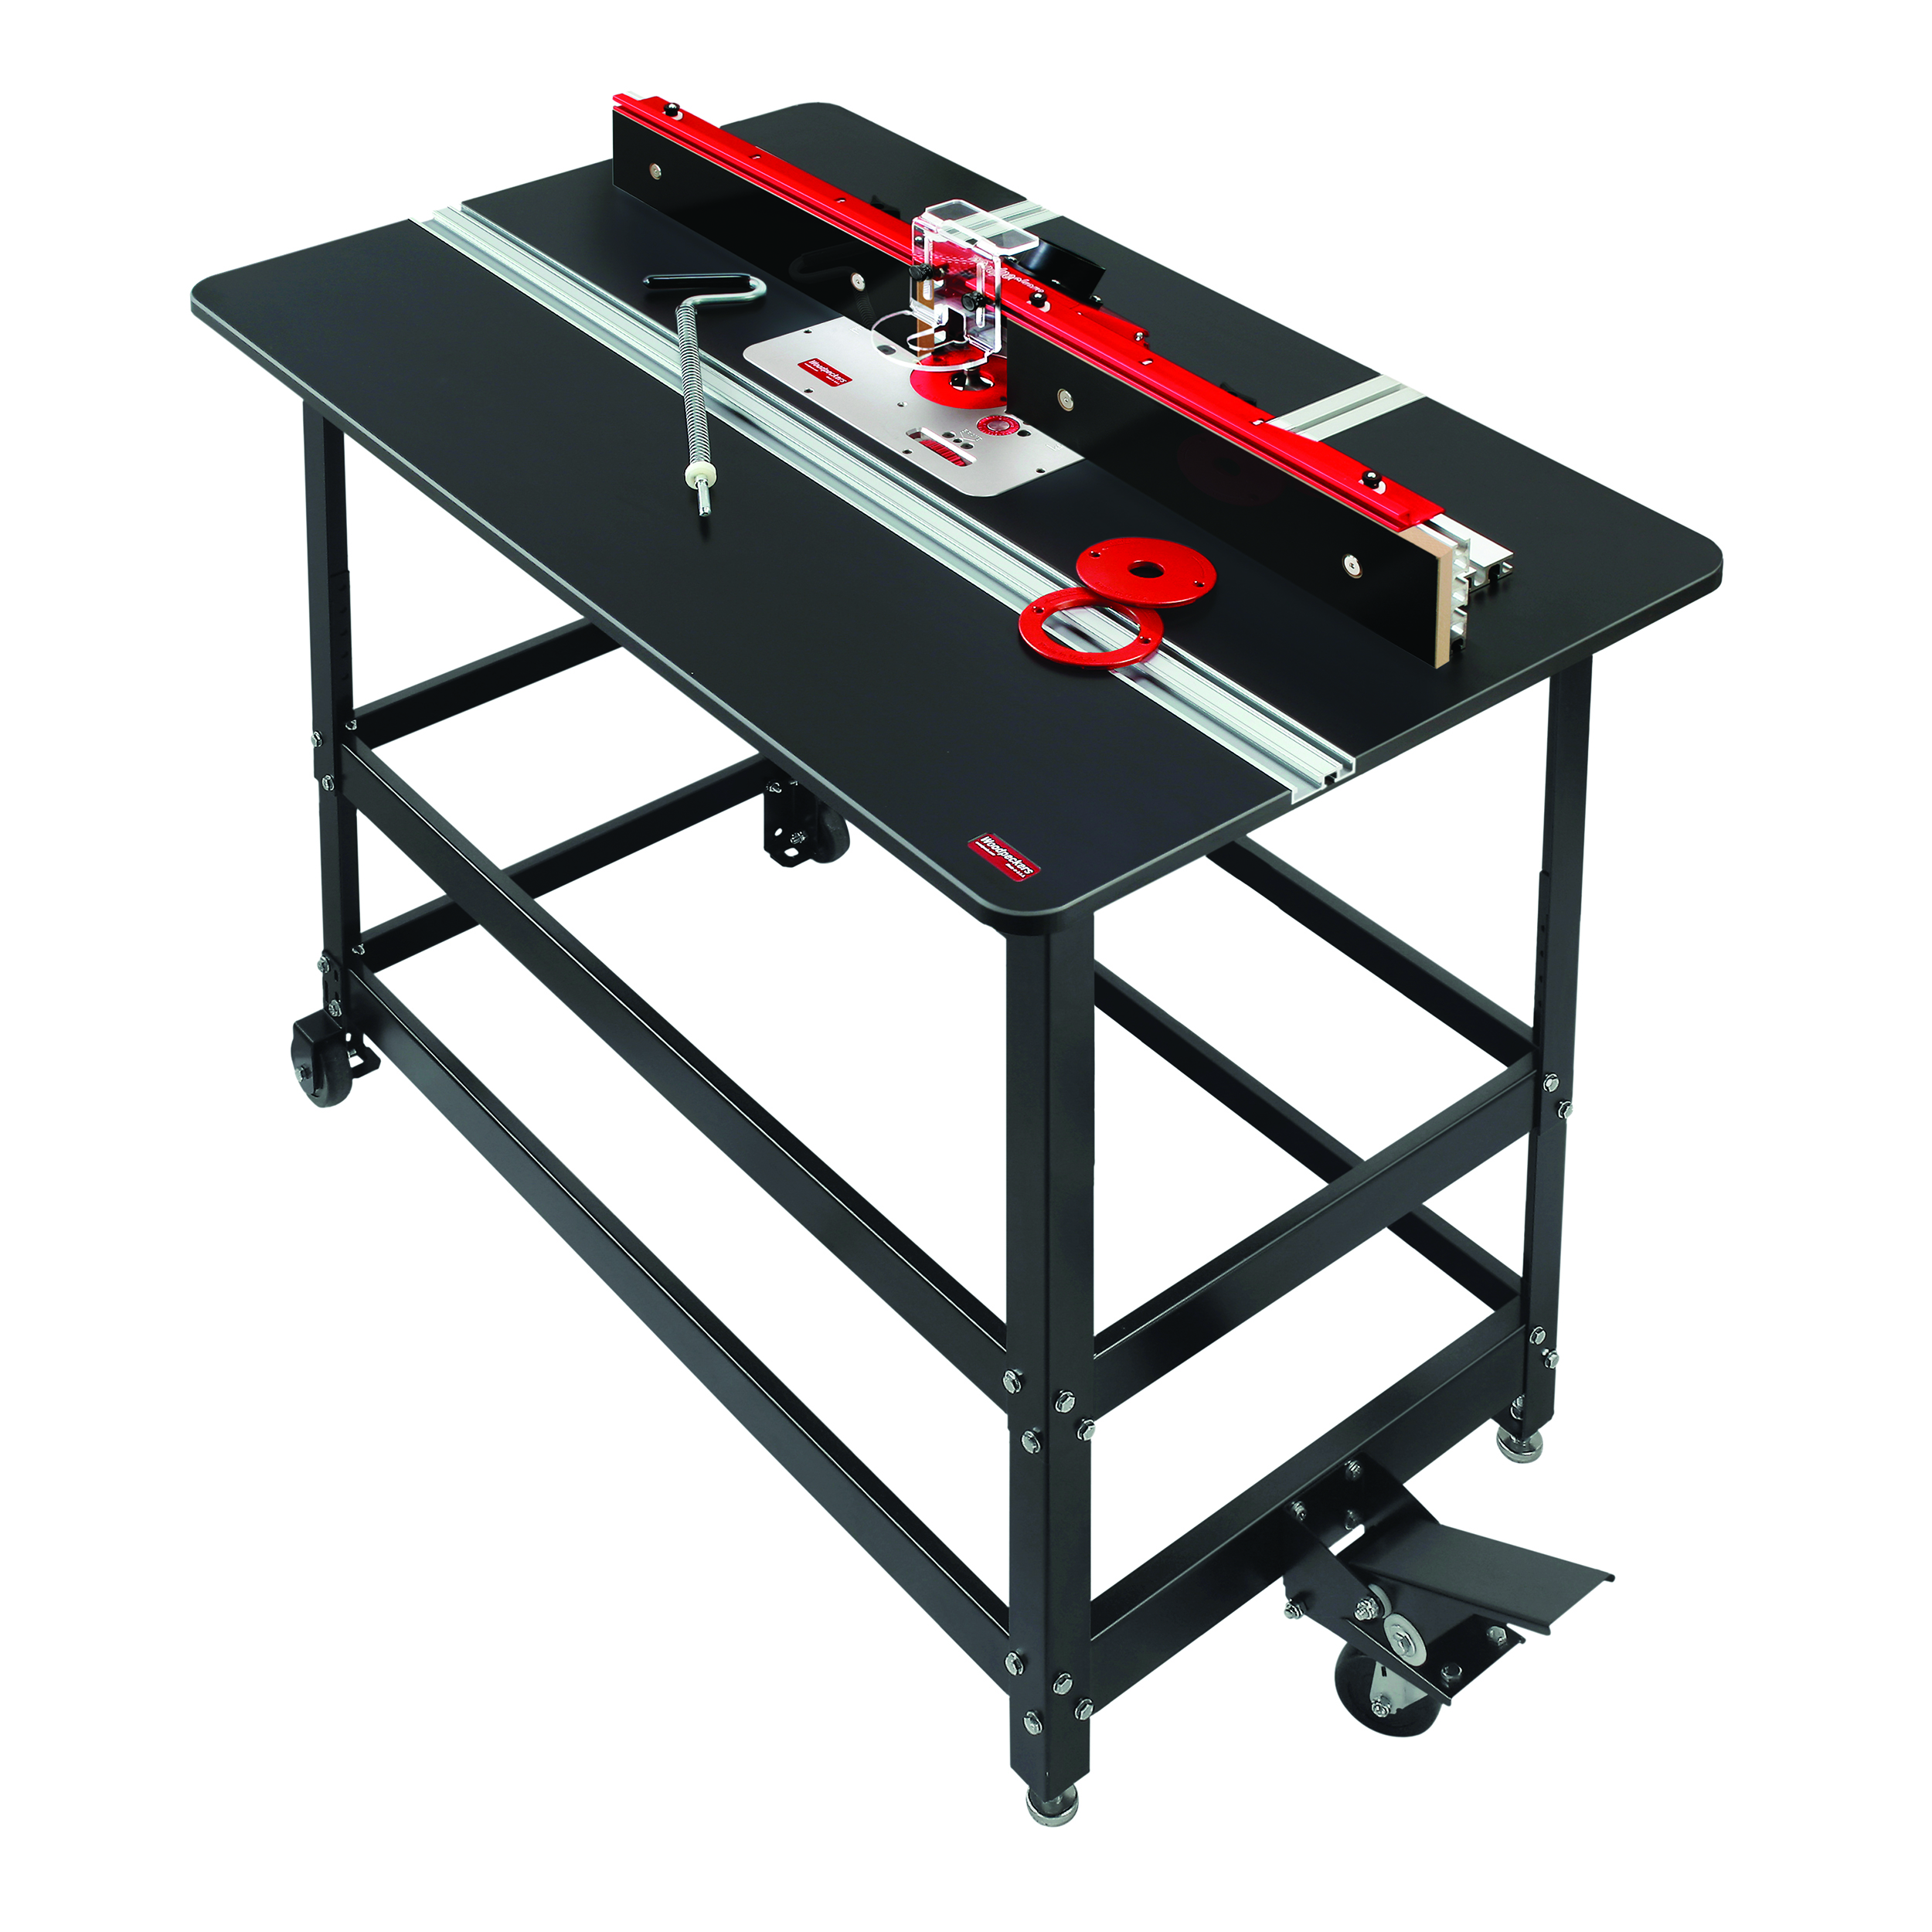 27x43 Premium Router Table Package With V2 420 Router Lift, Wpk# Prp-4-v2420